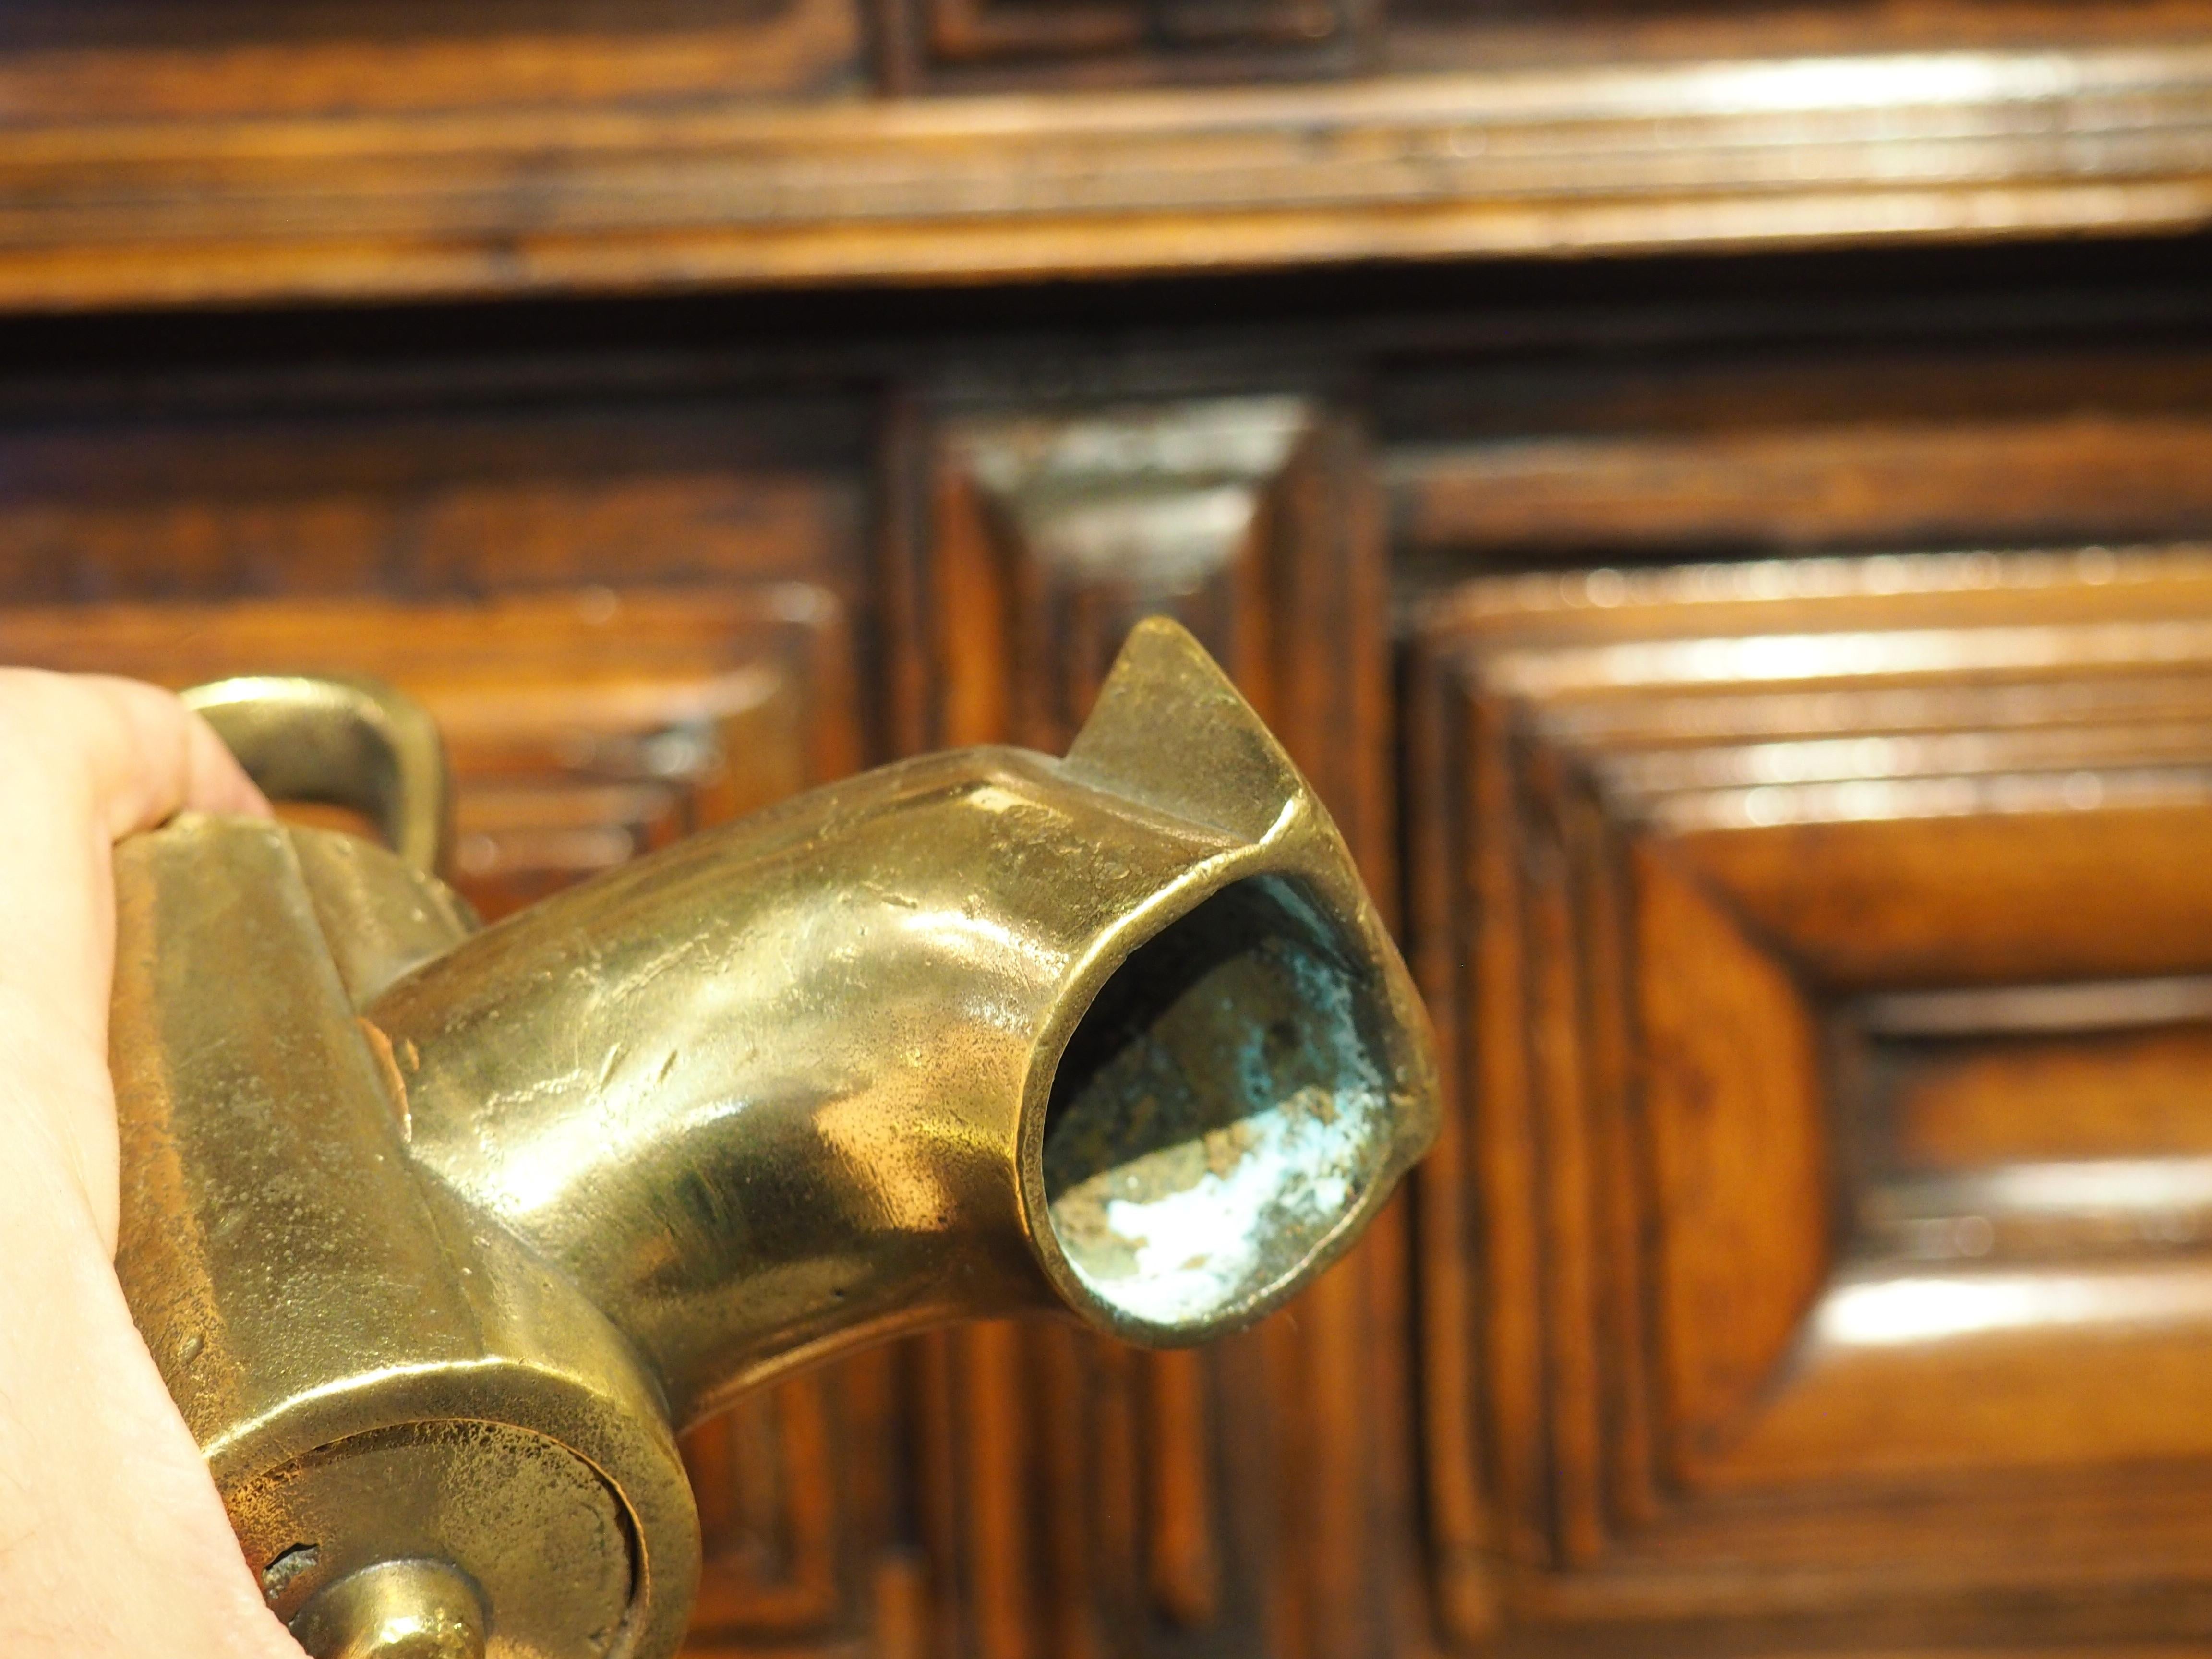 Originally a spigot for a French wine barrel, this bronze spout has a pierced two-finger turn valve reminiscent of a crown. The spout, which dates to the 1800s, is also embellished with an angular notch cut to the tail end of the pipe. Our